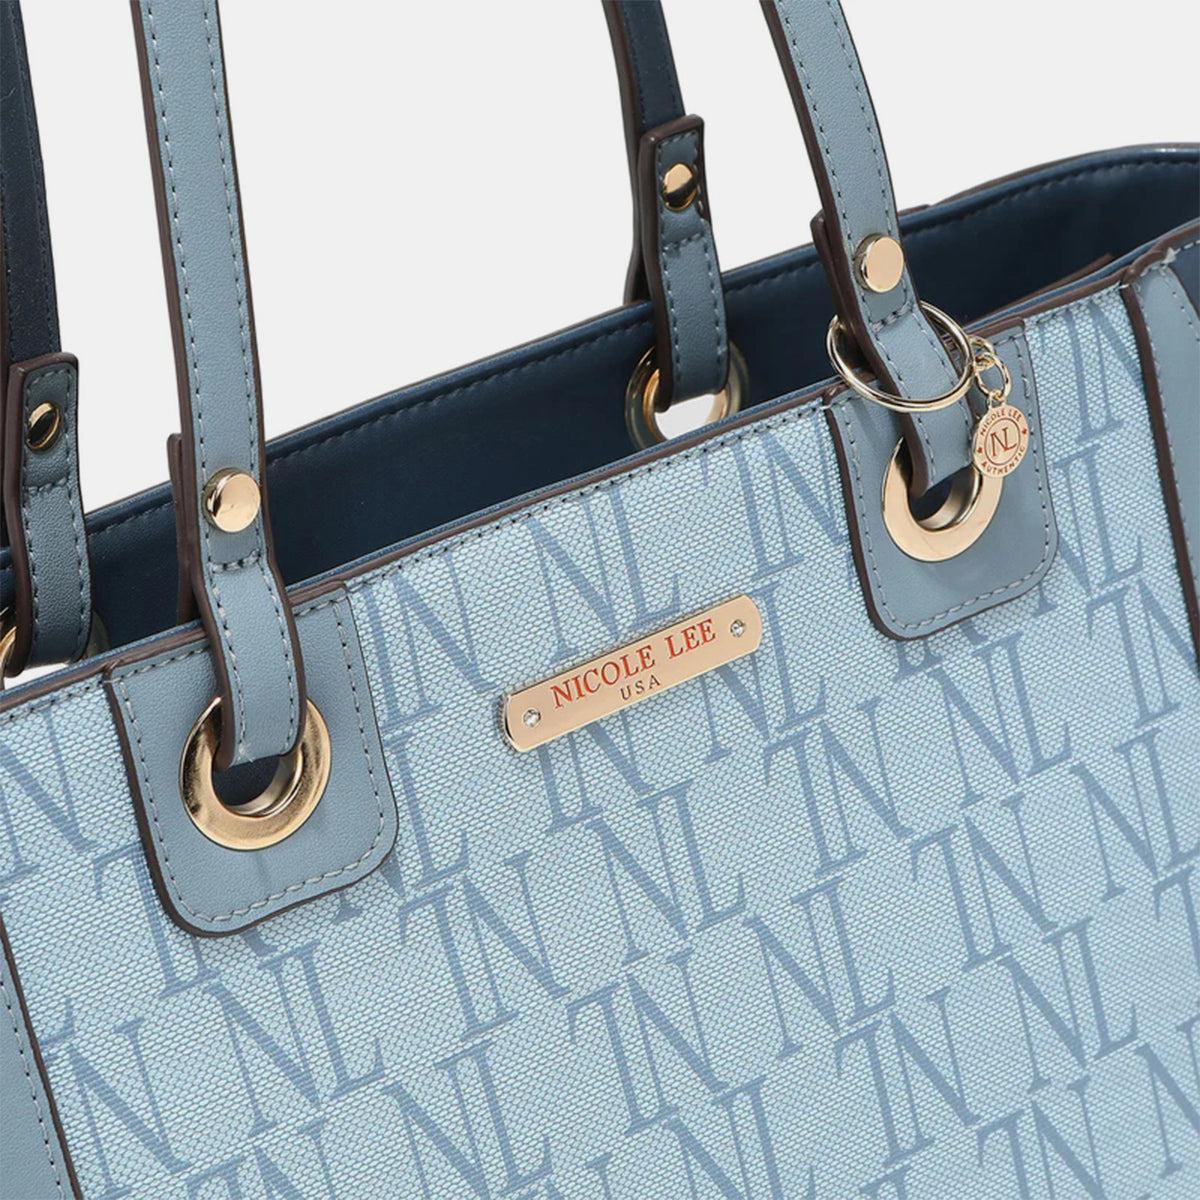 a blue handbag with a name tag on it